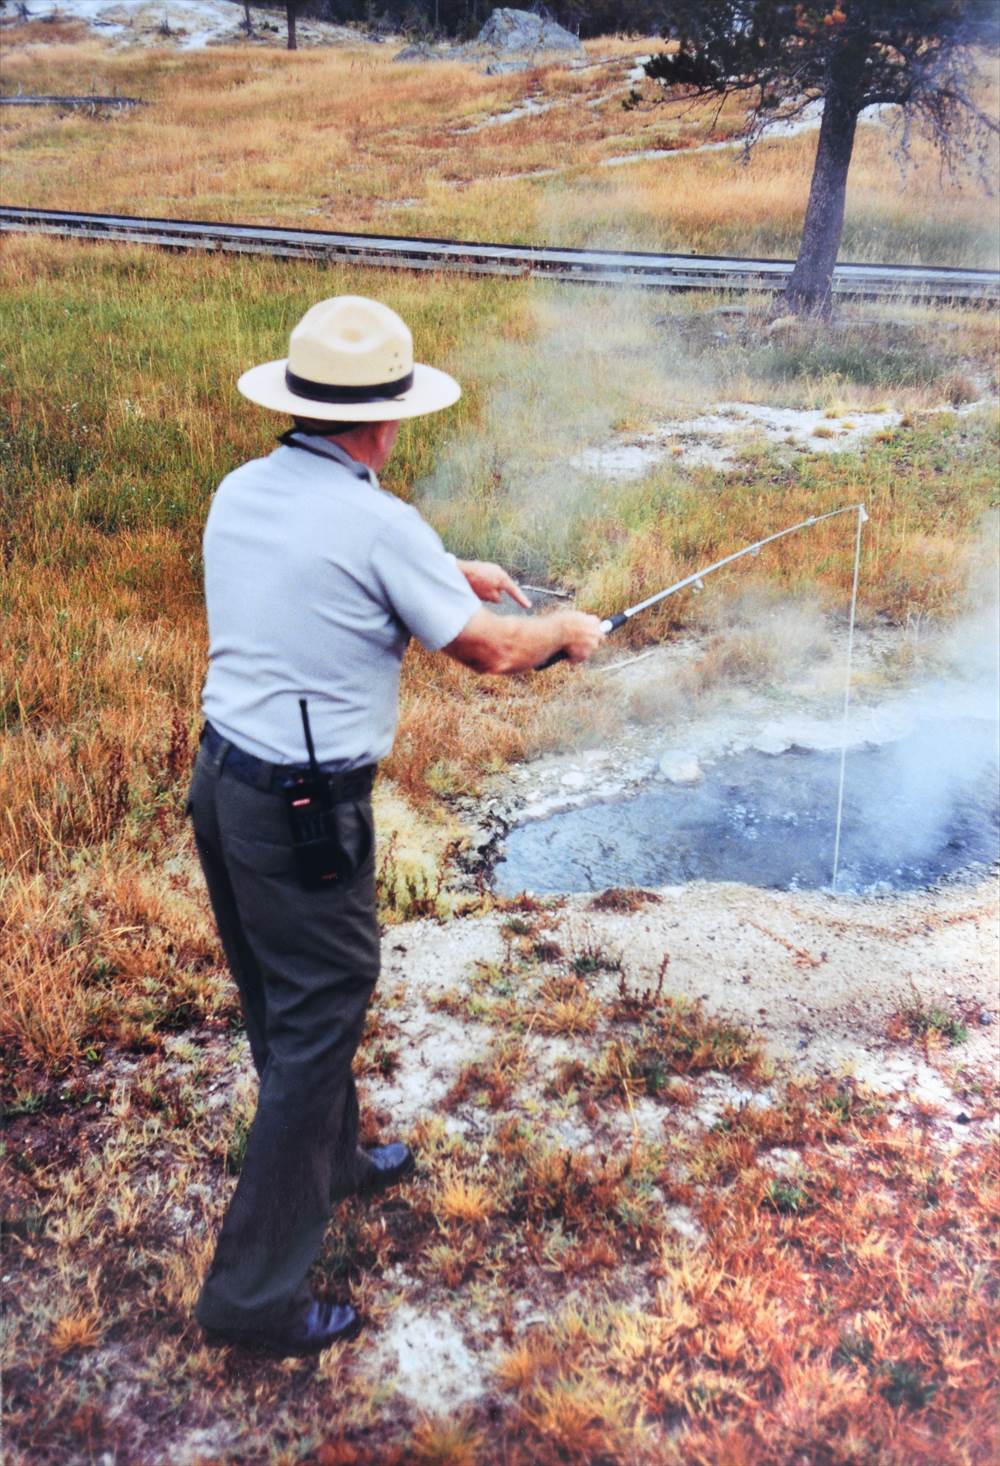 Picture of a ranger measuring the temperature of a hot spring using a fishing rod - like thermometer